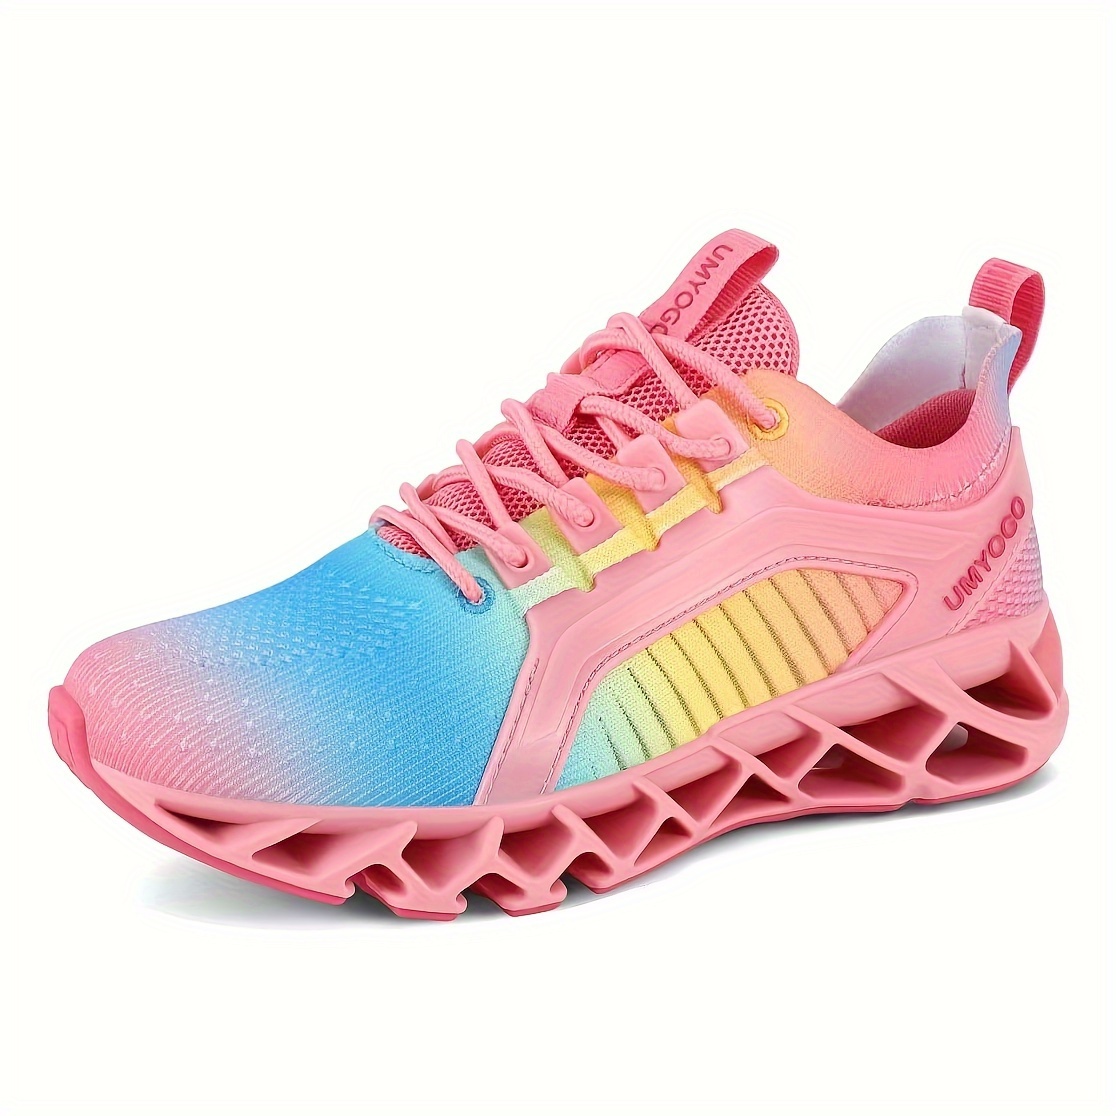 KINODAY Breathable Training Sneakers Casual Low Top Sports Shoes Comfy ...